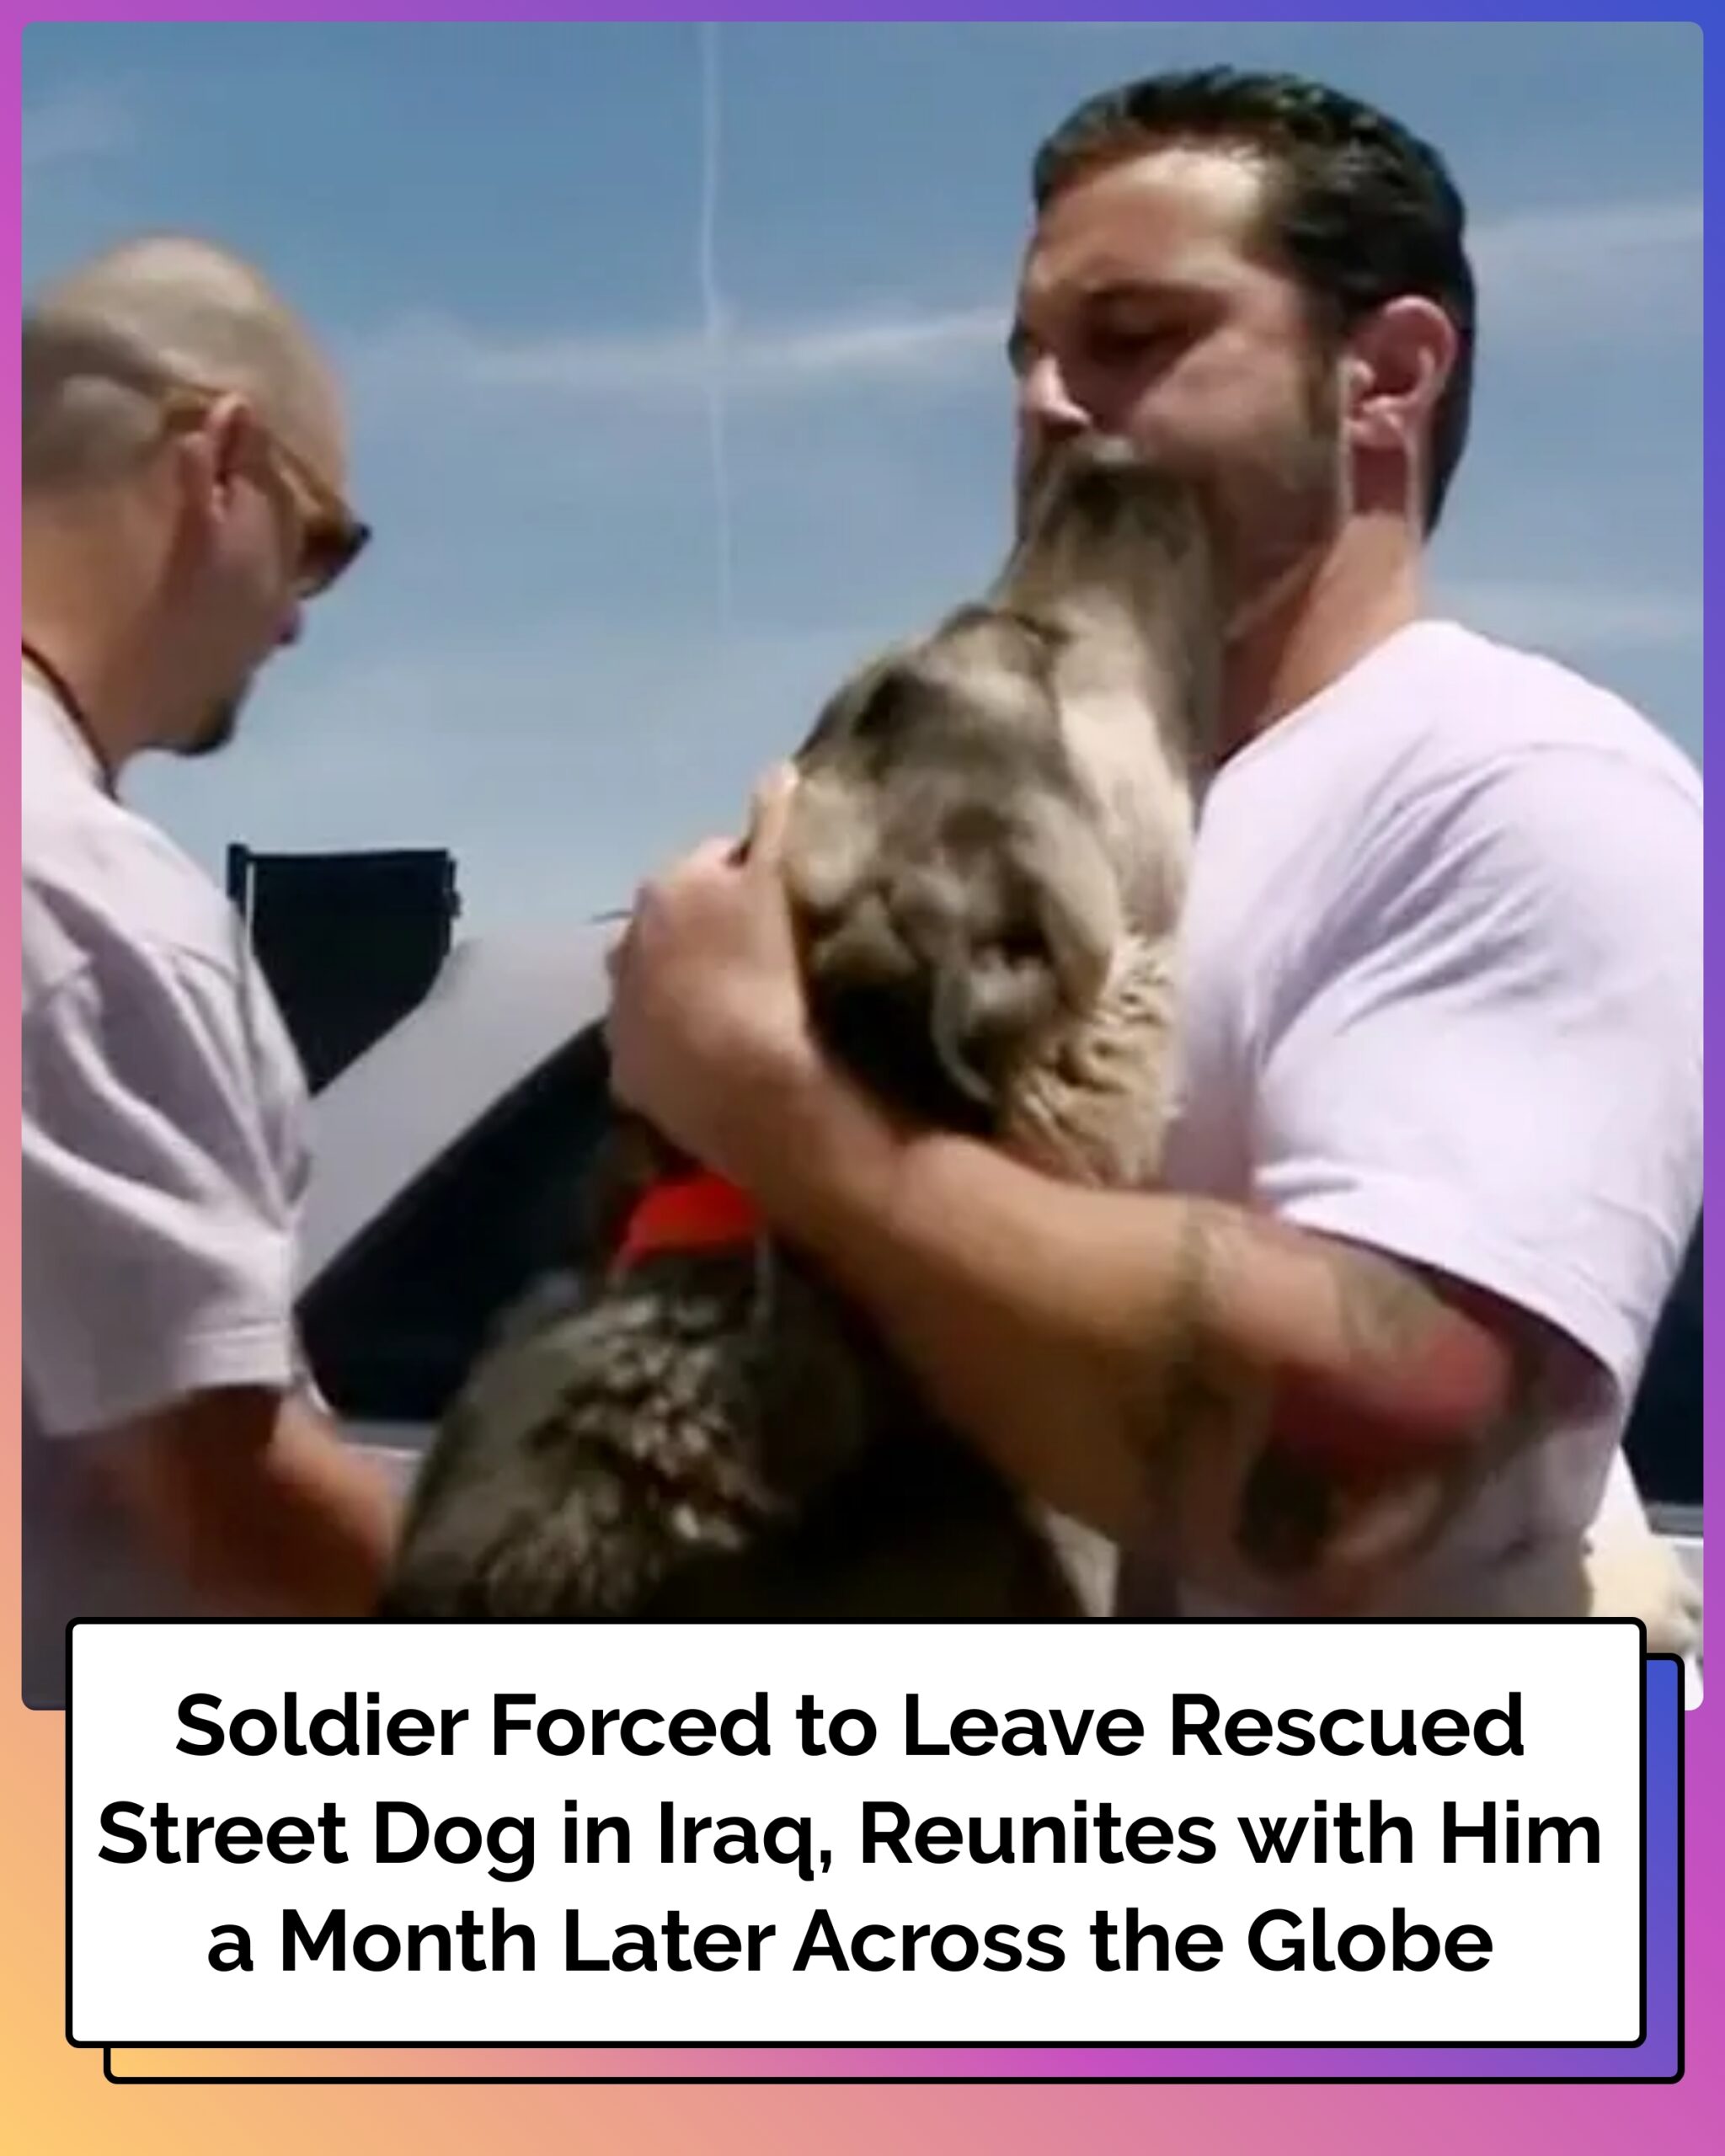 Soldier is forced to leave street dog he rescued in Iraq. 1 month later, they reunite on the other side of Earth